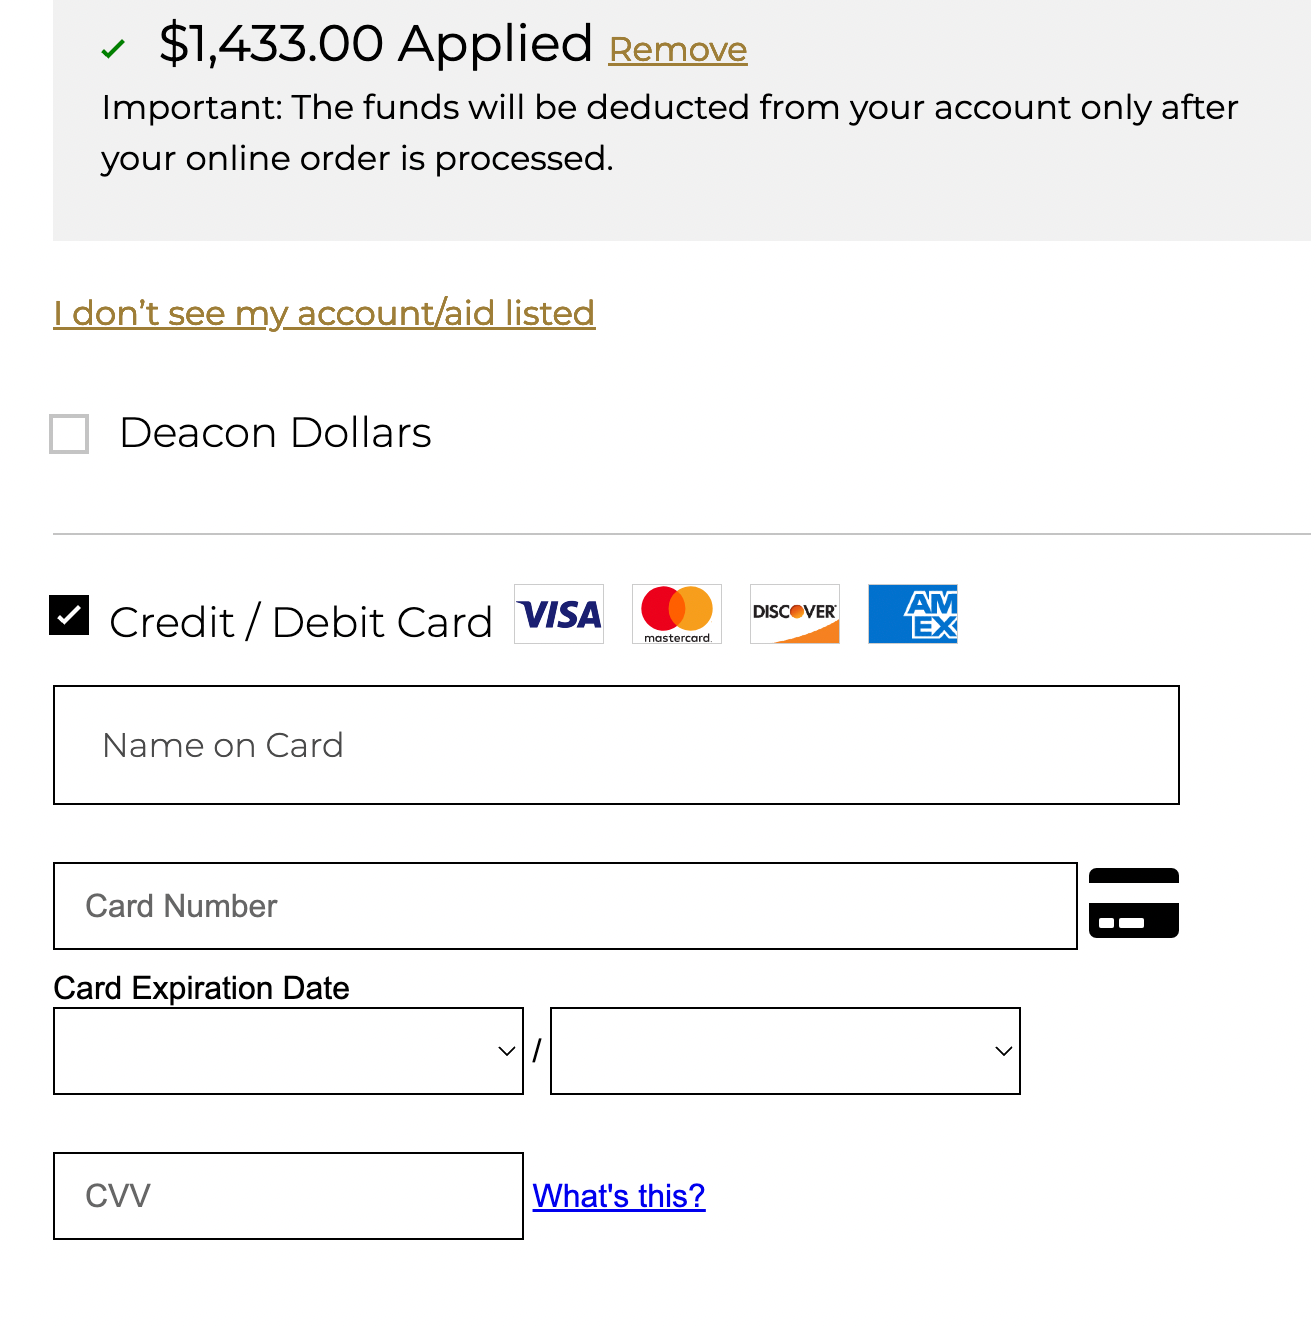 Screenshot of the Credit/Debit Card information screen where the user will enter card information if prompted